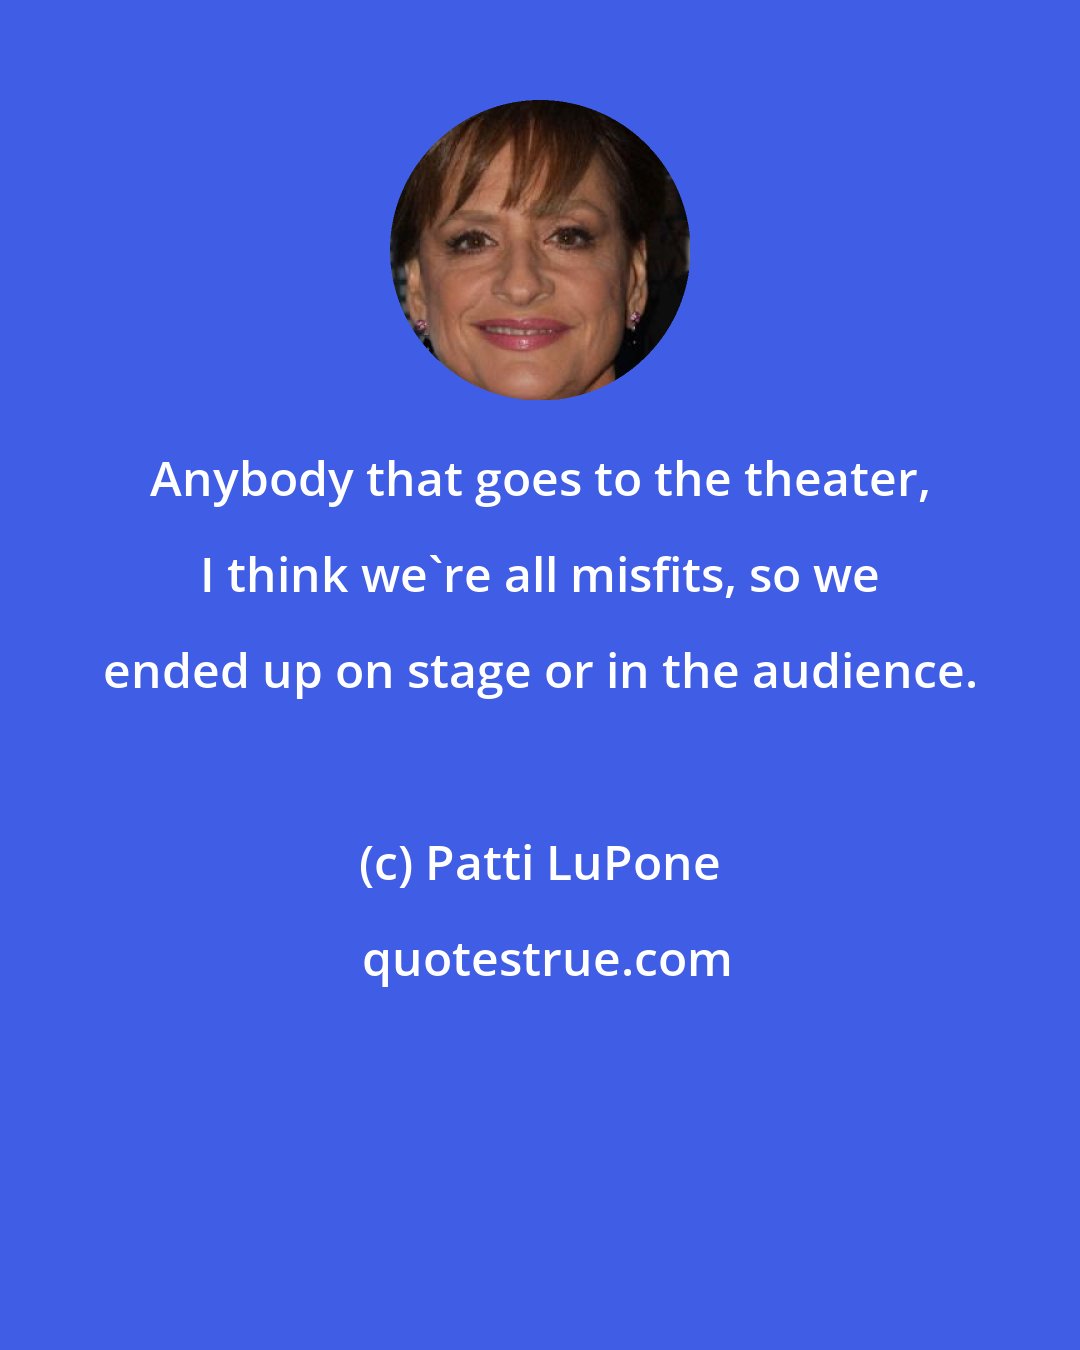 Patti LuPone: Anybody that goes to the theater, I think we're all misfits, so we ended up on stage or in the audience.